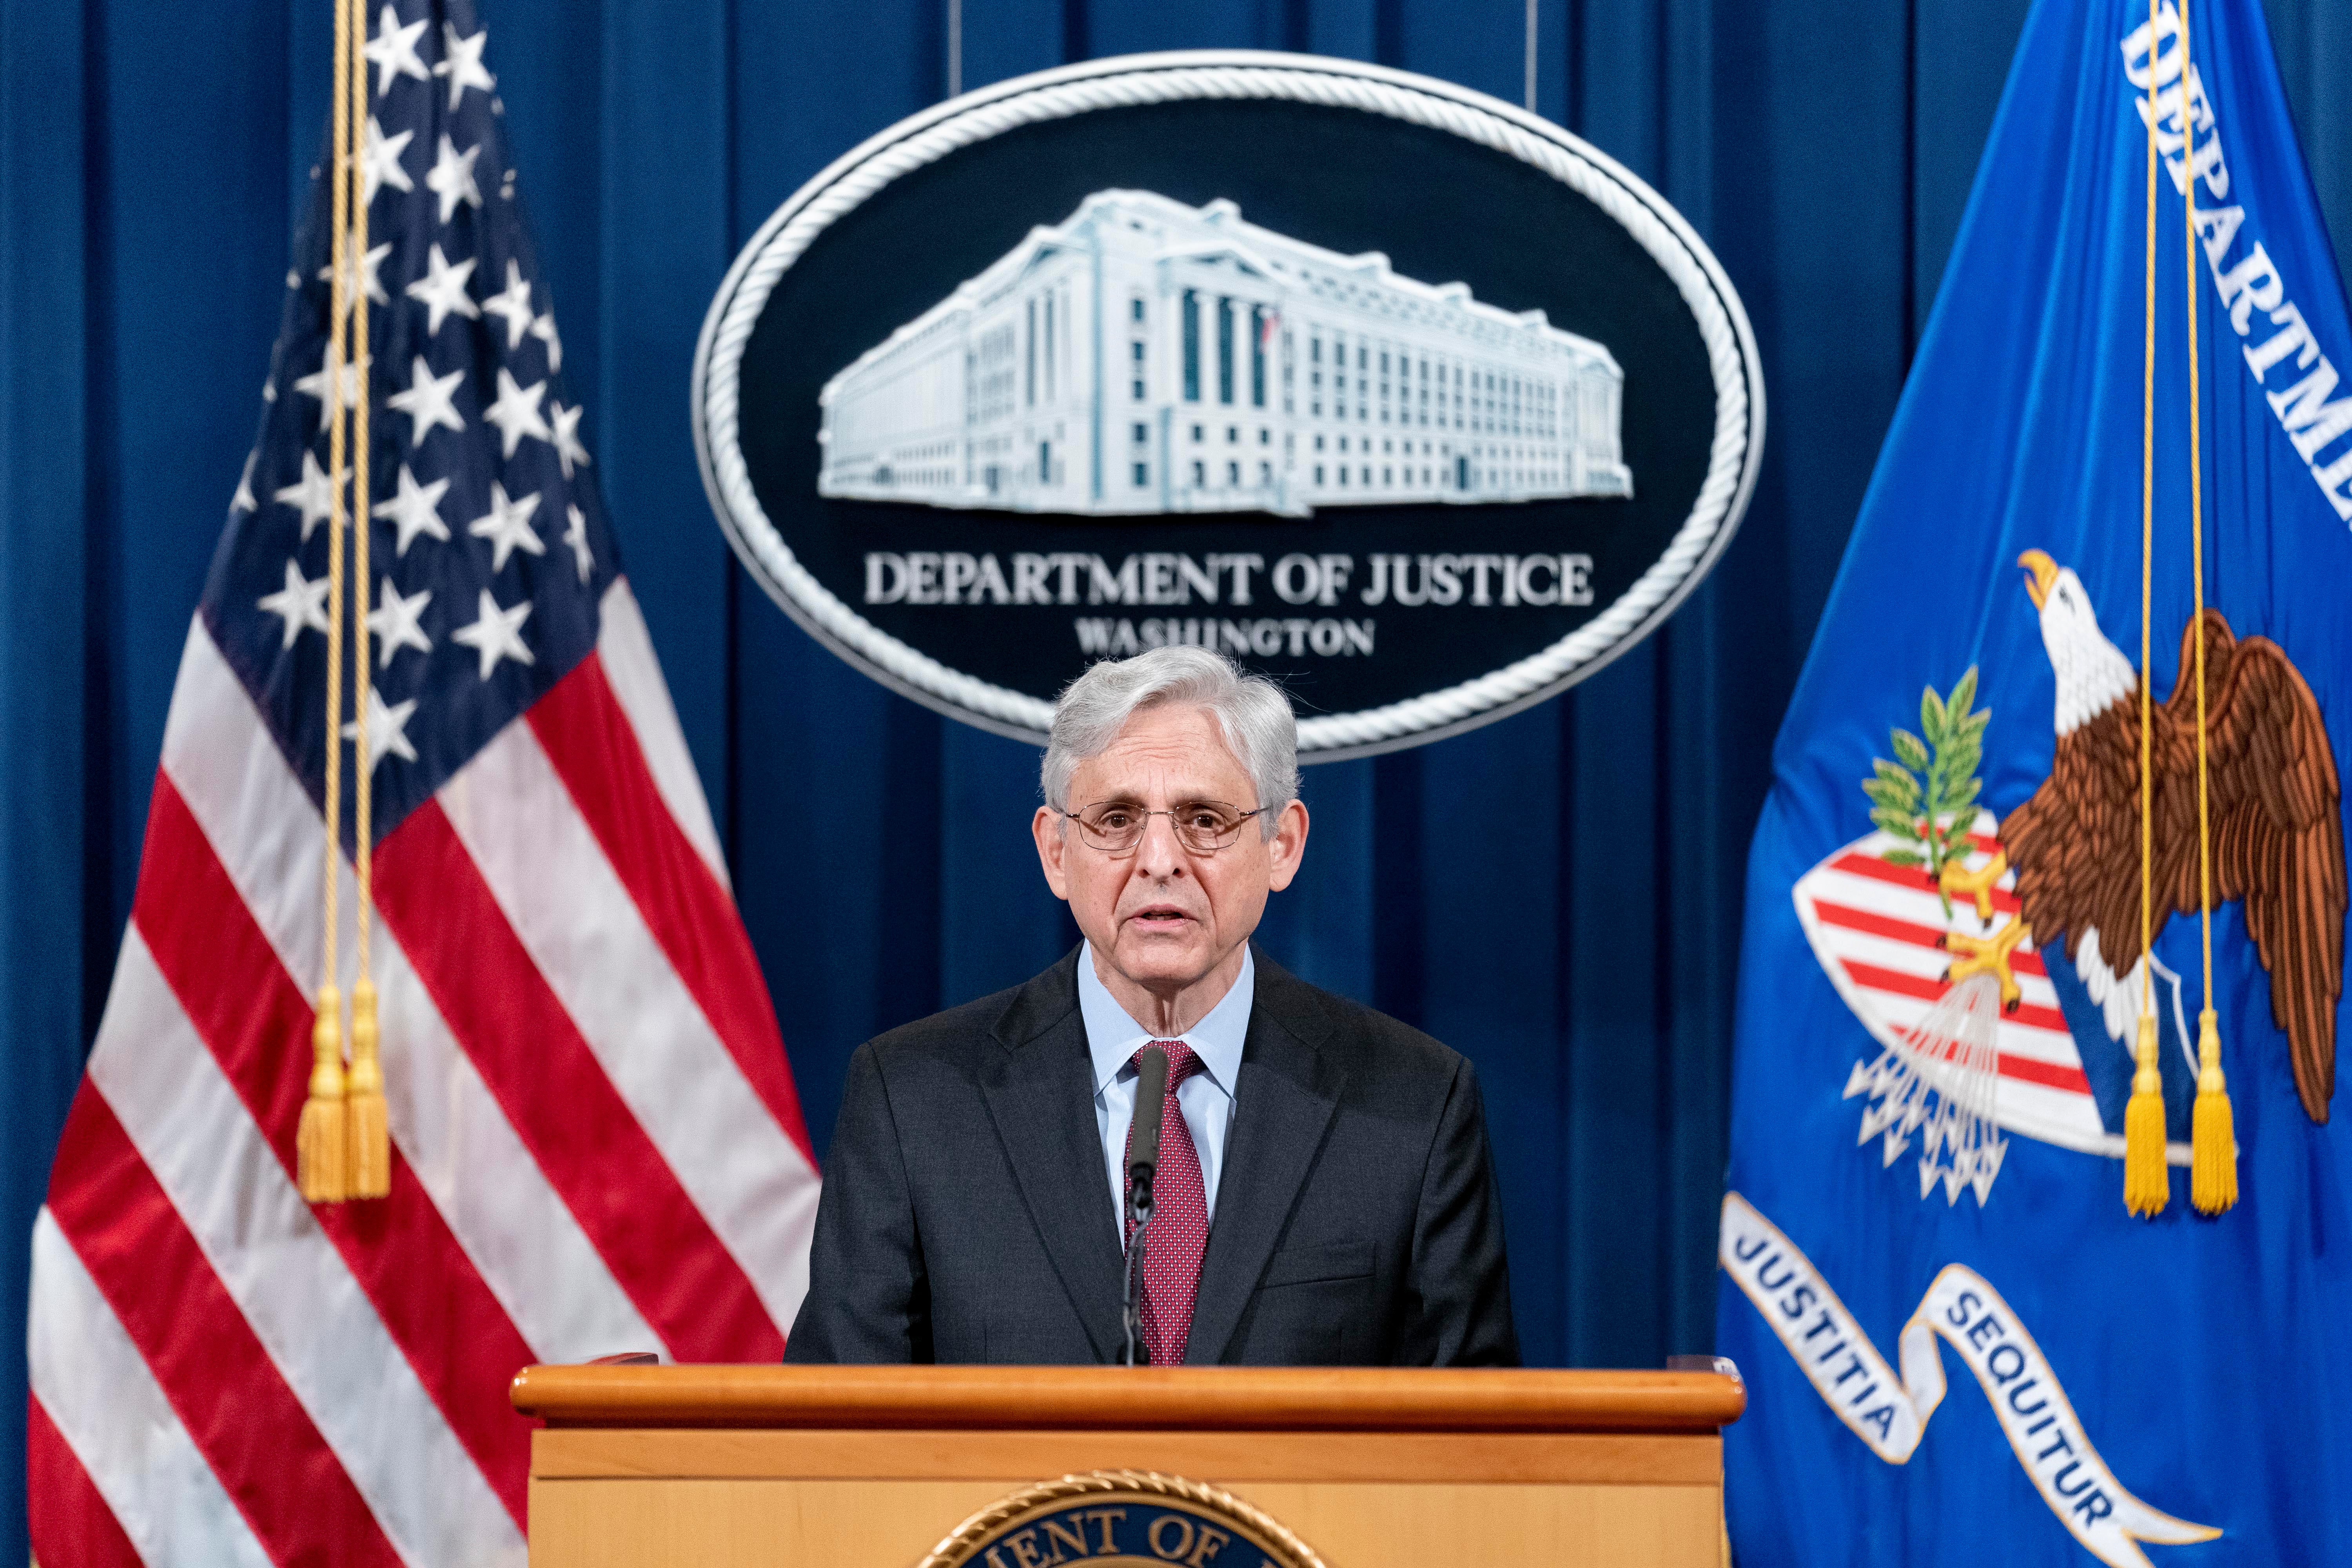 US Attorney General Merrick Garland speaks about a jury's verdict in the case against former Minneapolis Police Officer Derek Chauvin in the death of George Floyd, at the Department of Justice, in Washington, DC